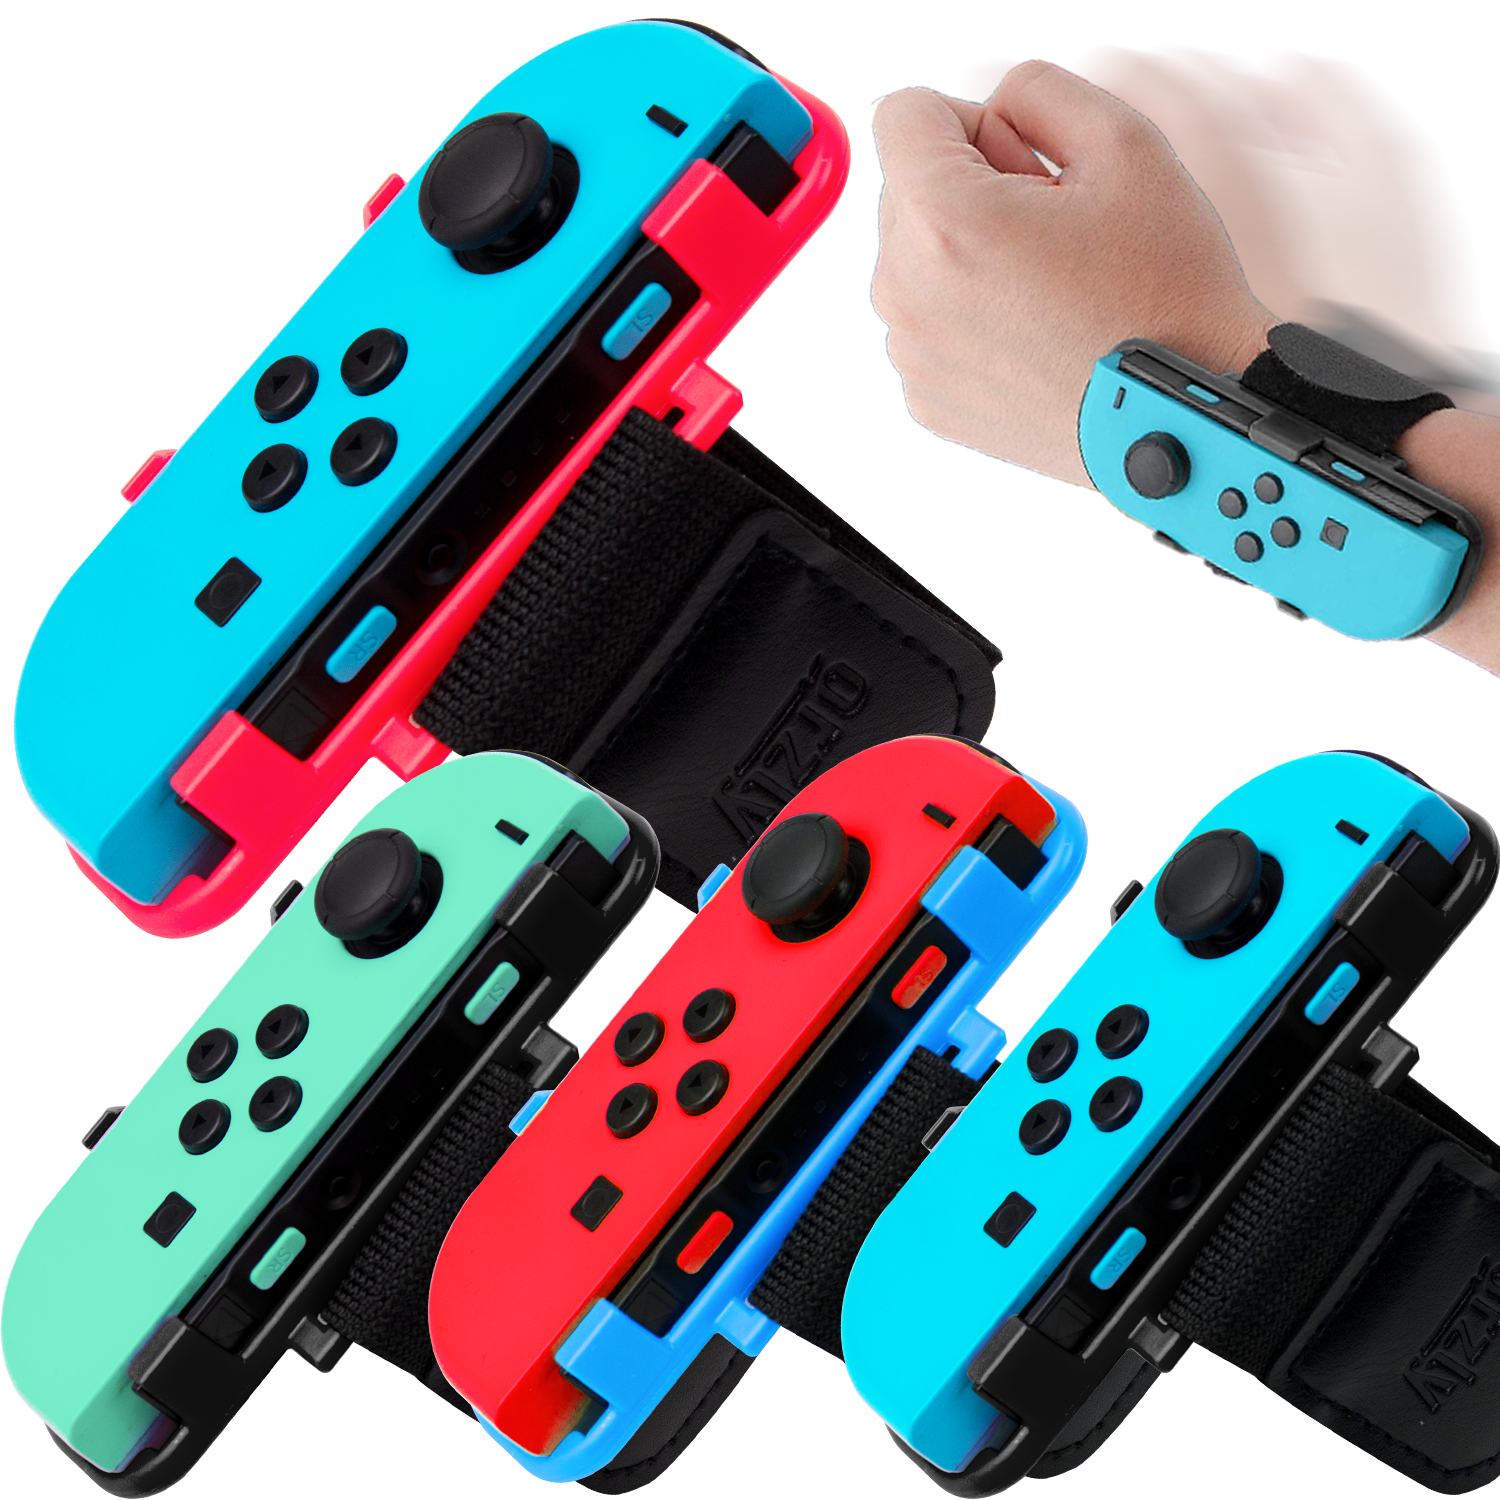 Joy-Con Wrist Bands for Nintendo Switch & OLED